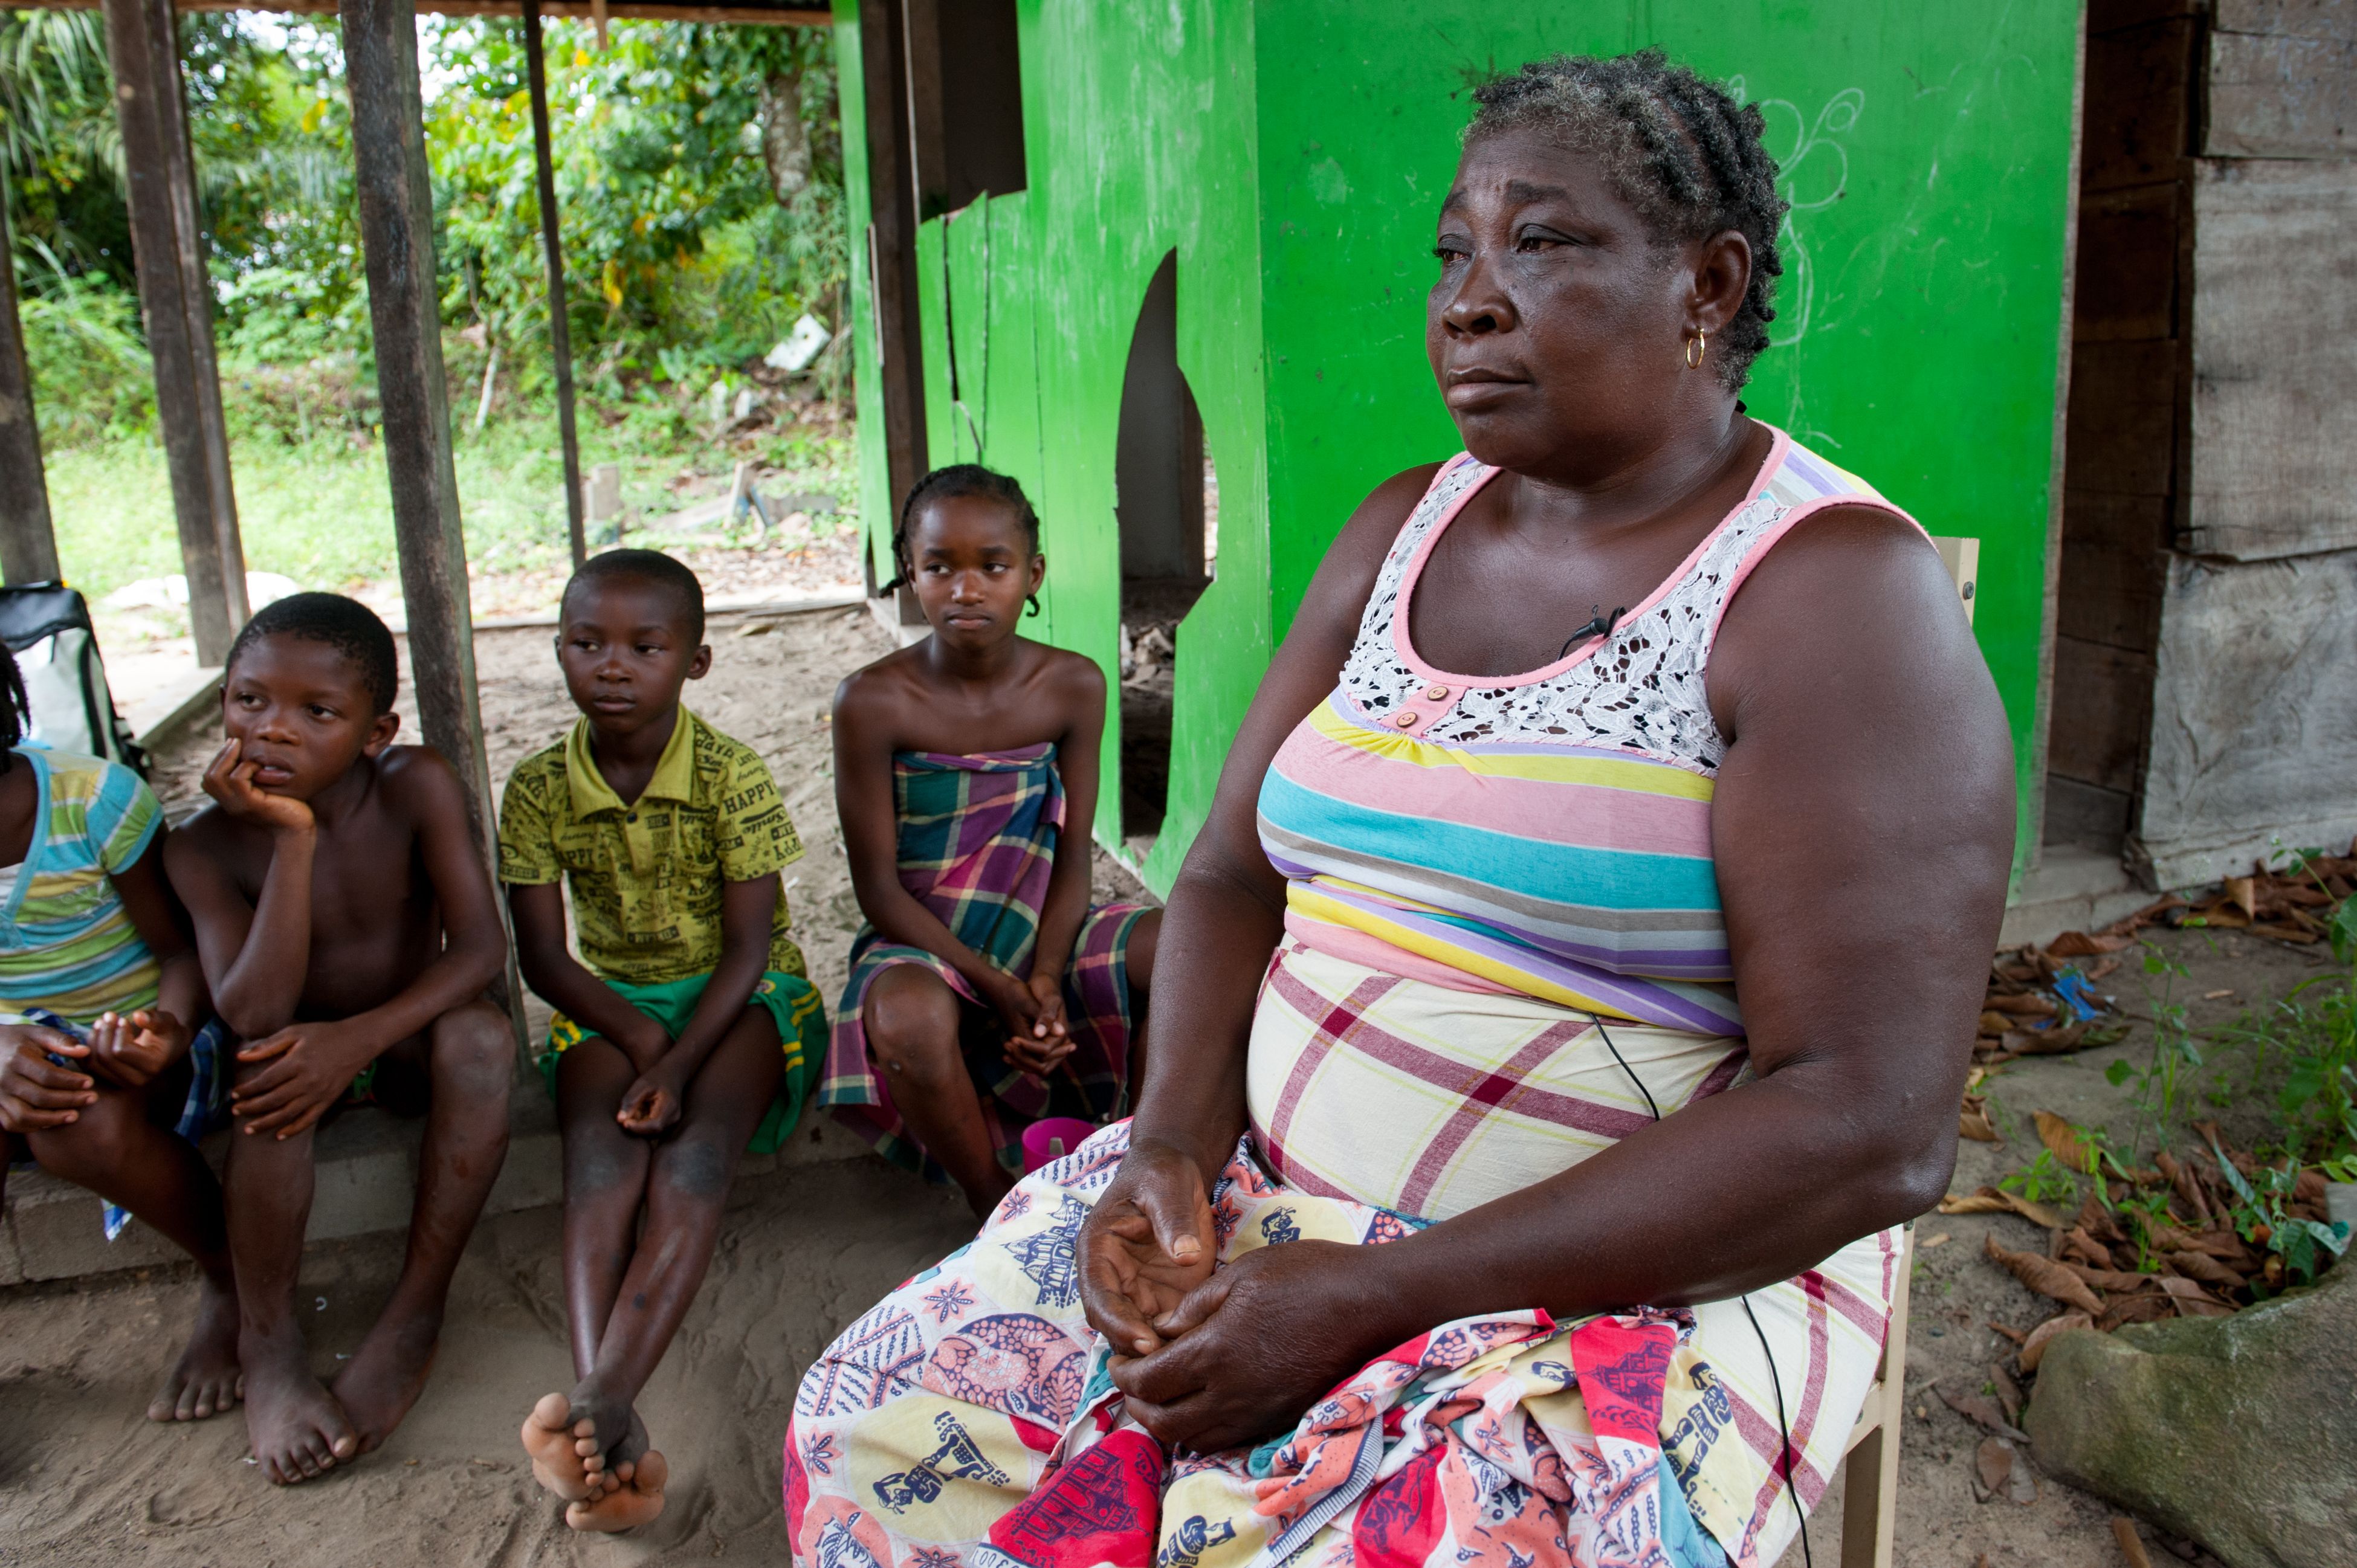 Emelien Adjako sits for an interview in her village of Kajapaati along the Suriname River on Tuesday, March 14, 2017. Adjako was one of those from over 40 Saamaka villages displaced by the flood waters caused by the formation of a reservoir with the construction of the Afobaka Dam. Built by Suralco to power a now defunct aluminum smelter, the dam now provides about half of Surinam's electricity, none of which has reached Adjako's replacement home. Image by Stephanie Strasburg/Pittsburgh Post-Gazette. Suriname. 